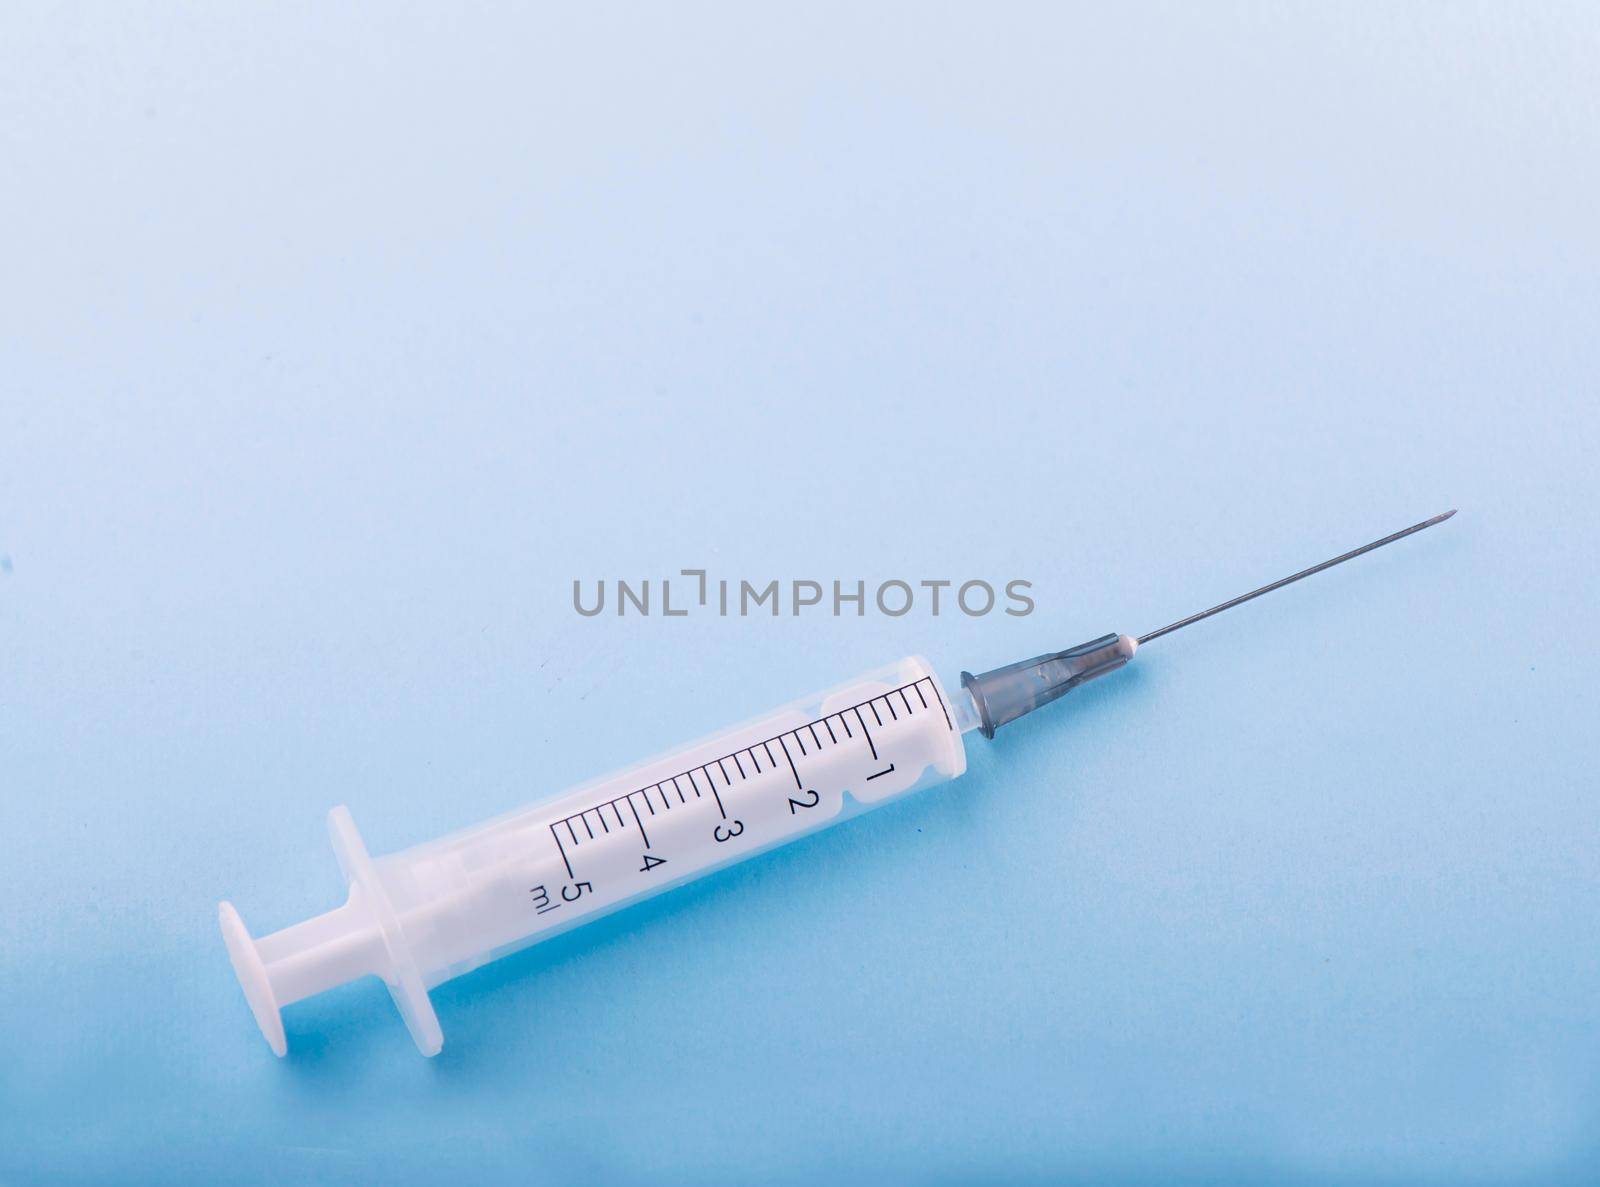 syringe on the table, medical supplies are on the table by aprilphoto